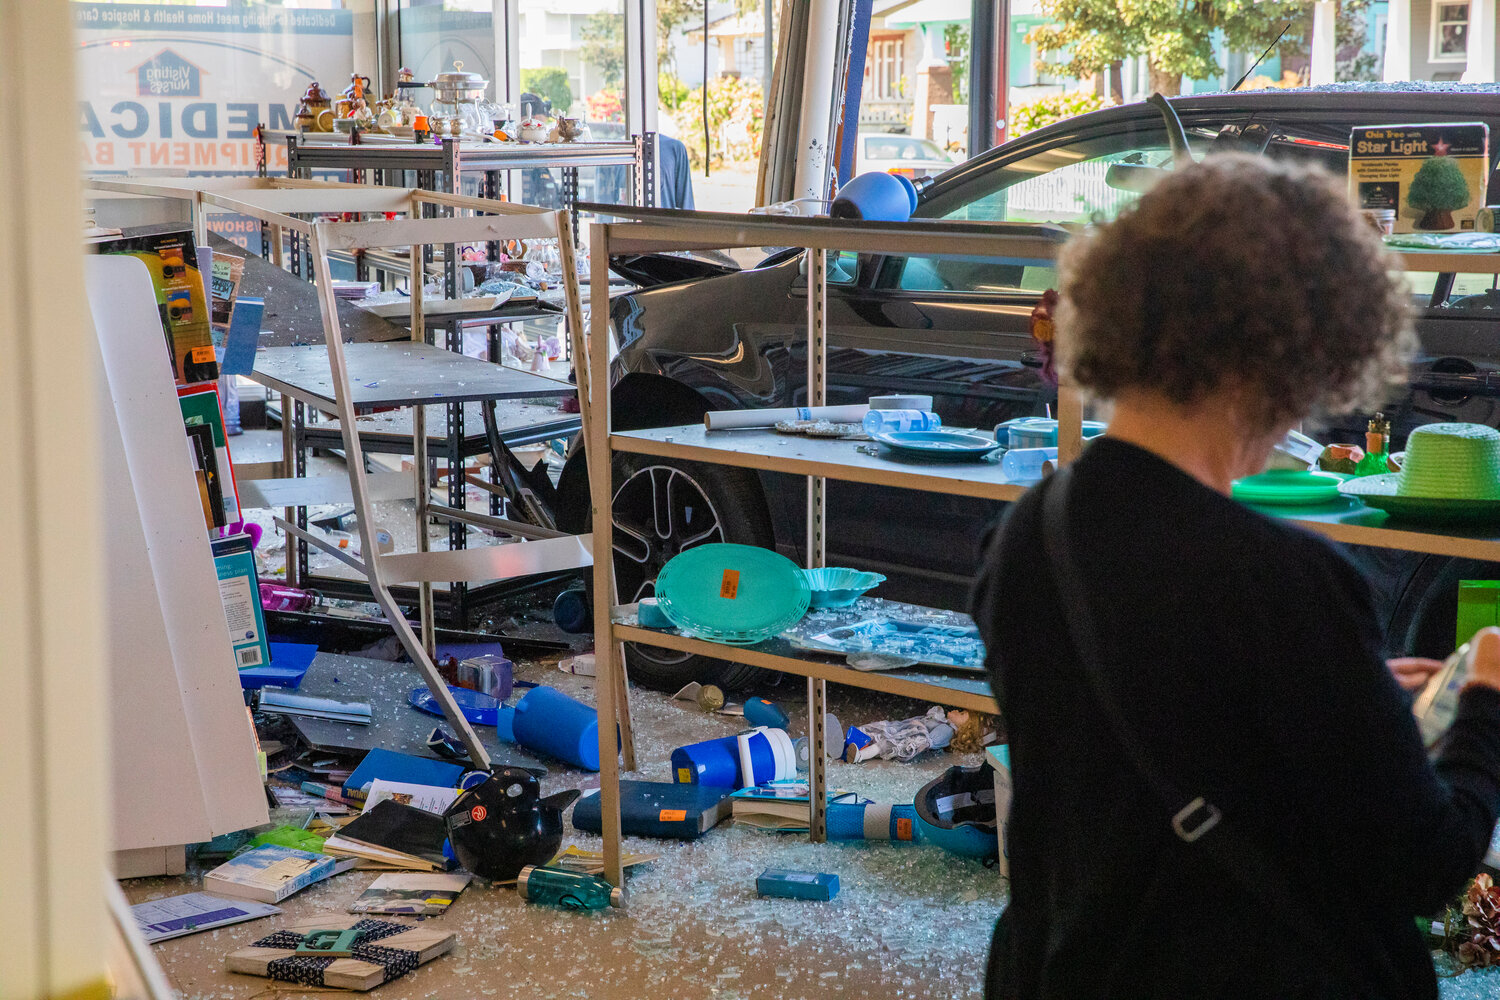 Damaged is accessed at Visiting Nurses in Centralia after a vehicle crashed through windows, destroying shelves full of items, at the location Thursday morning.